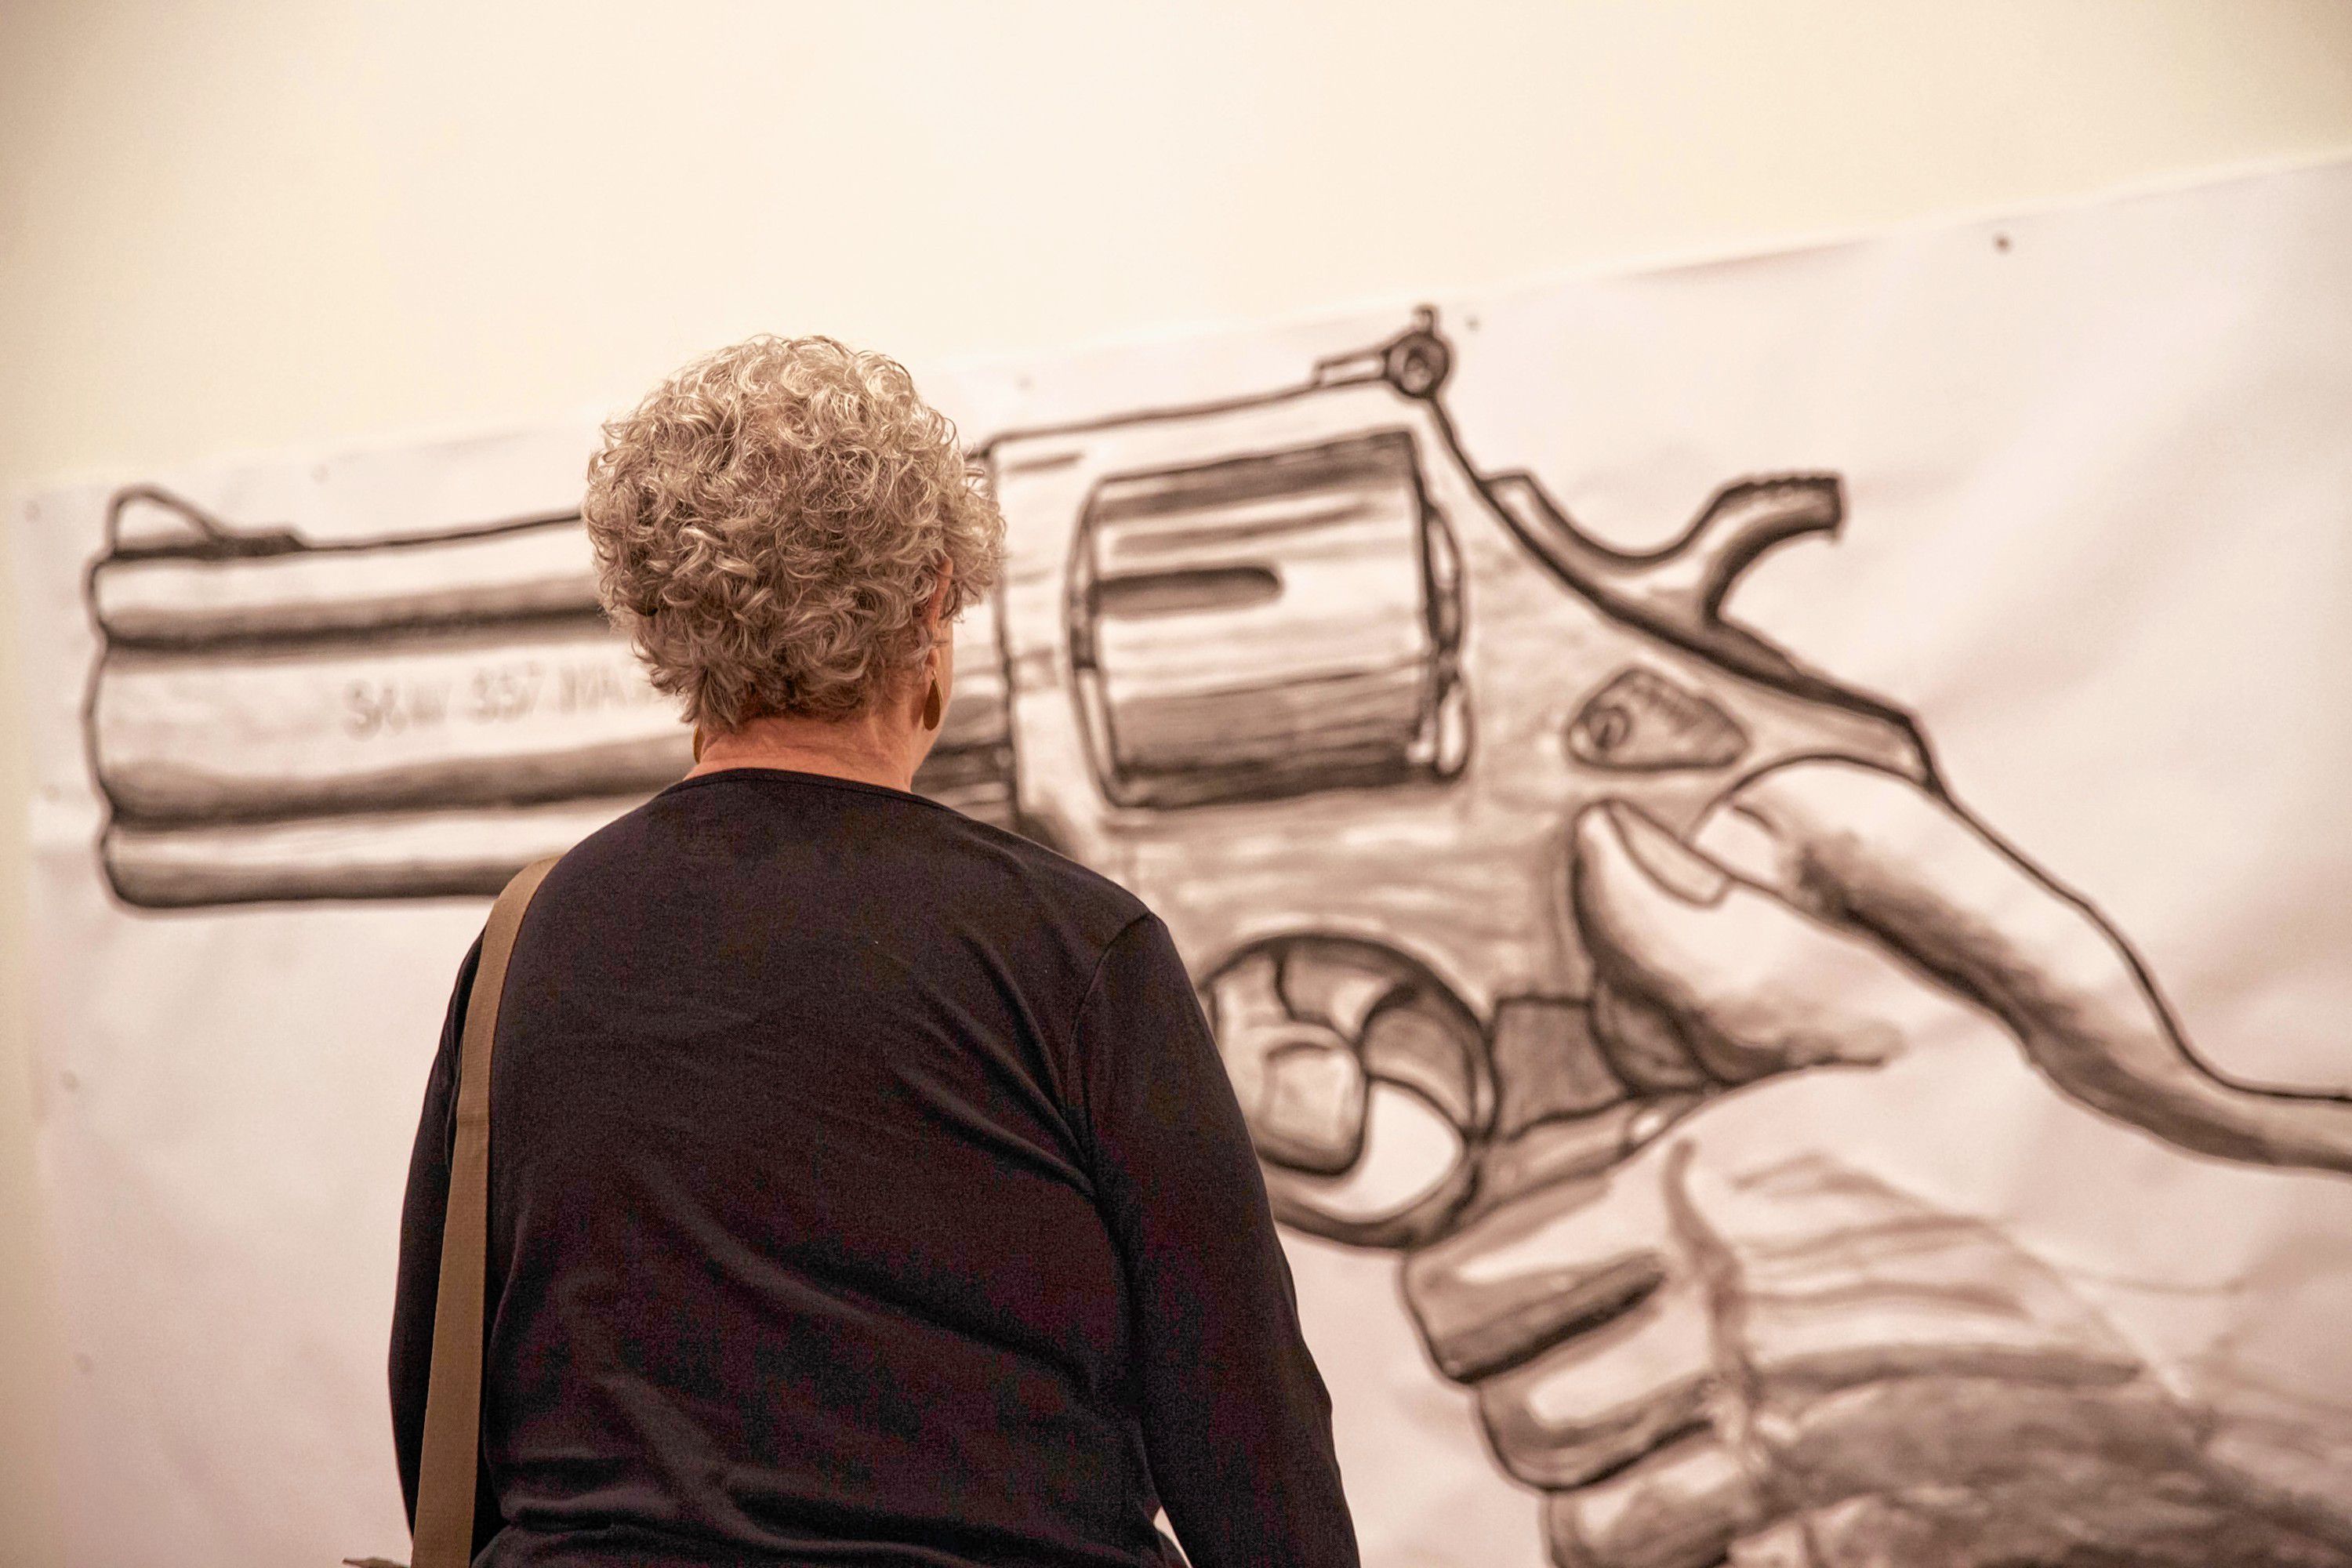 Review: “Up In Arms” — Brattleboro Museum offers an artful twist on the gun show